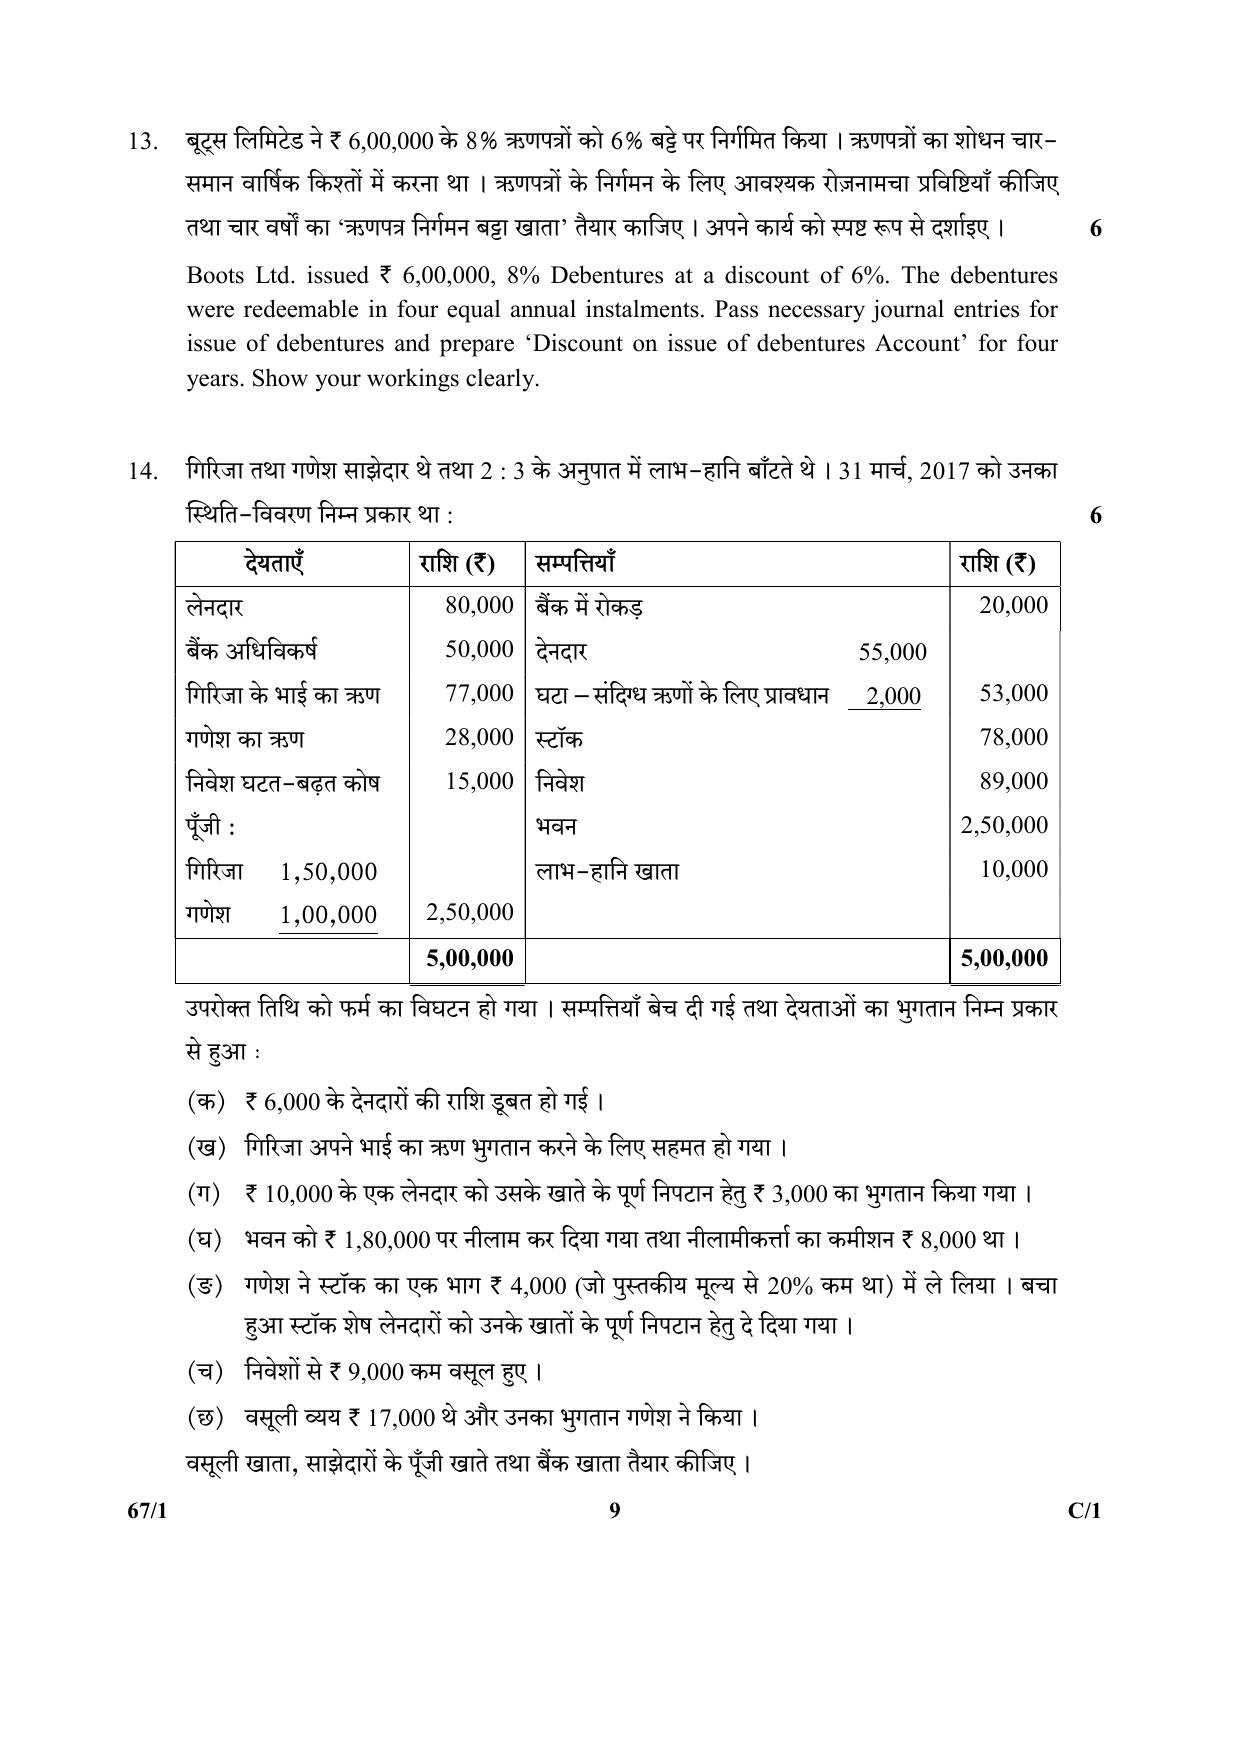 CBSE Class 12 67-1  (Accountancy) 2018 Compartment Question Paper - Page 9